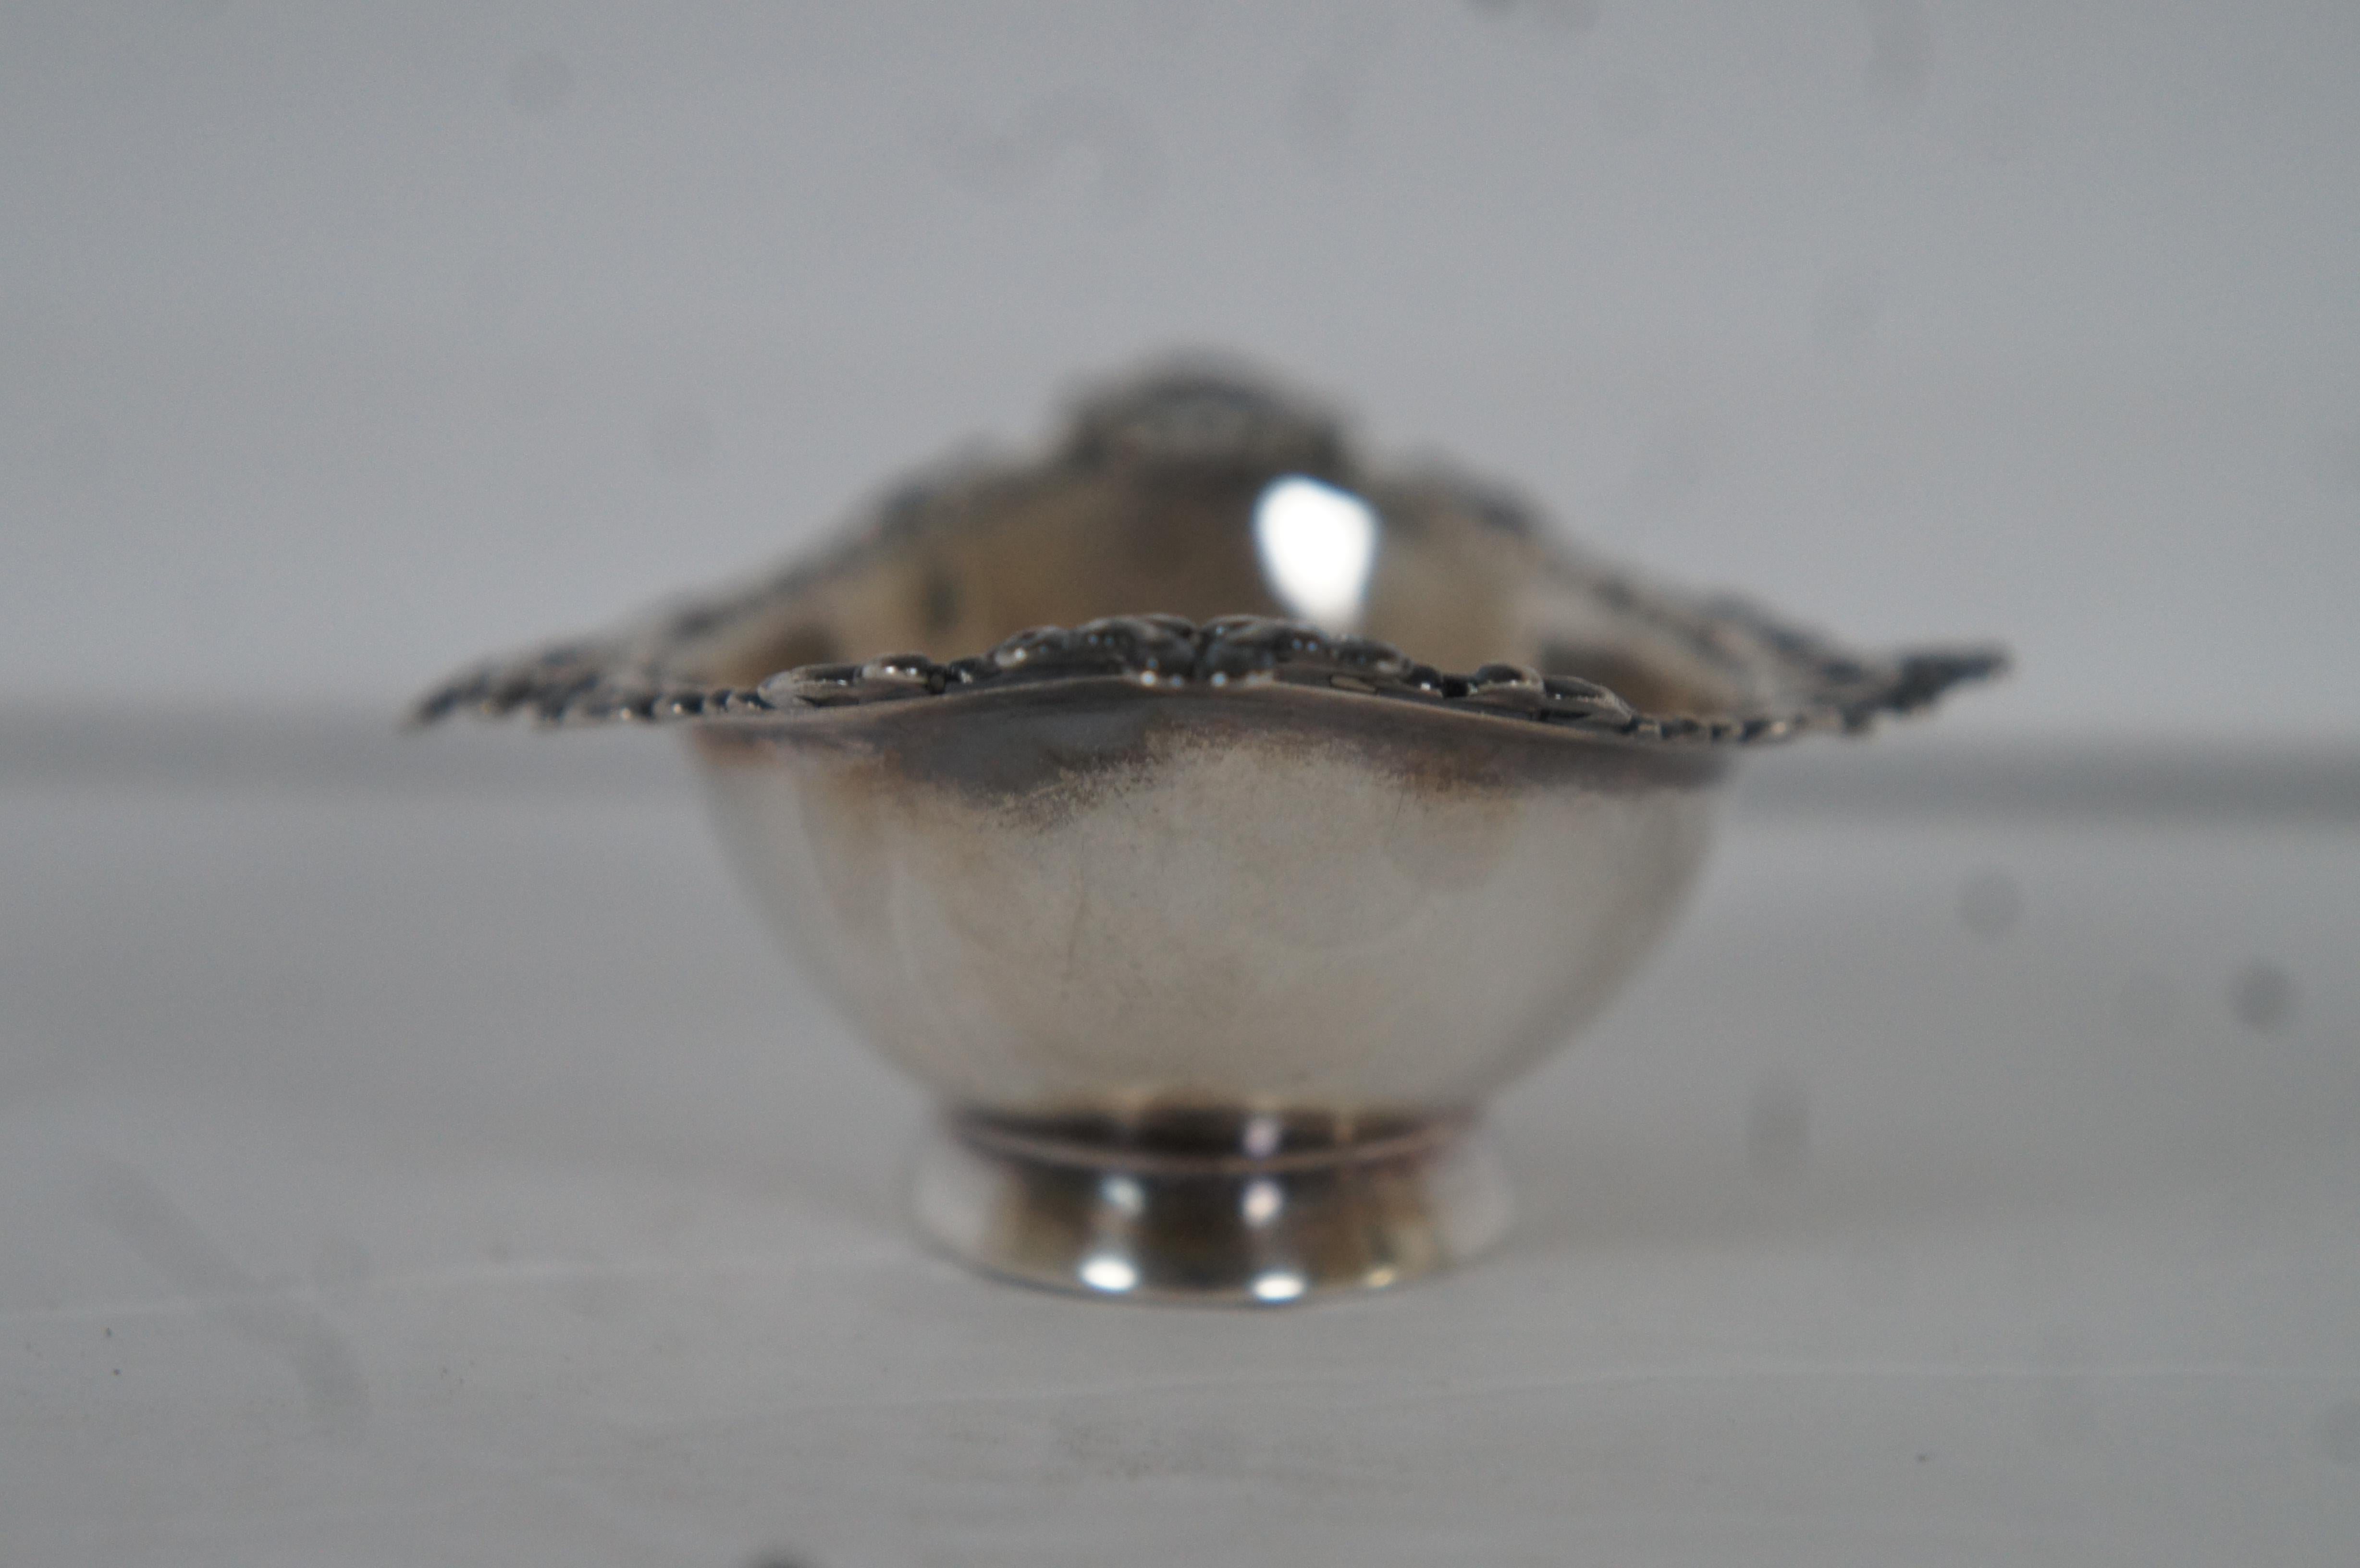 Antique Galt & Bro 72 Baroque Sterling Silver Footed Bowl Compote Nut Dish 45g 2